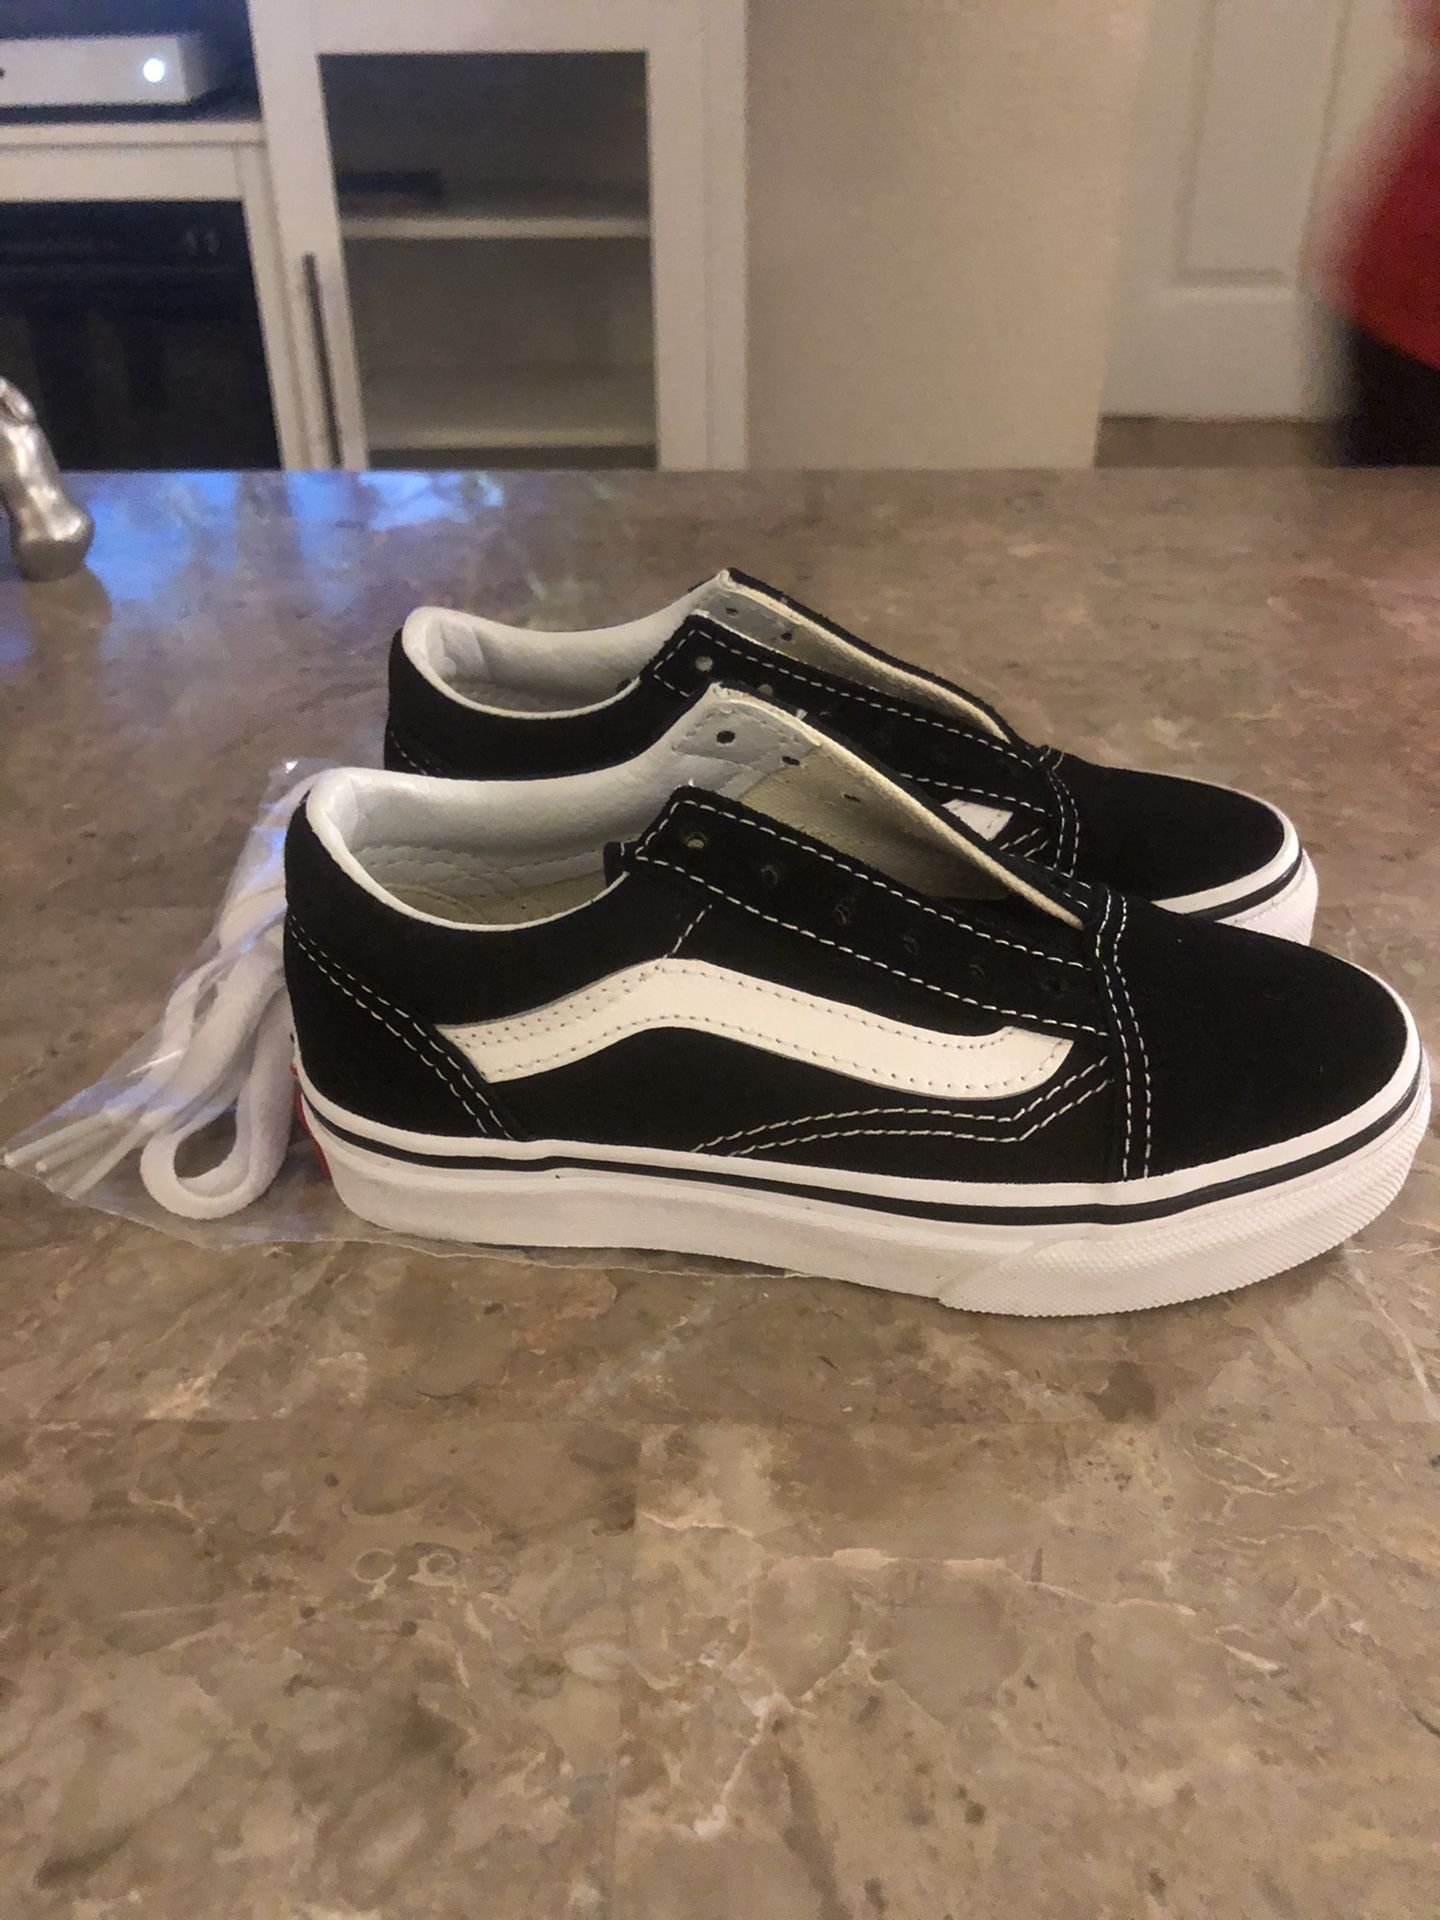 Brand new black and white vans w/out box kids size 11.0